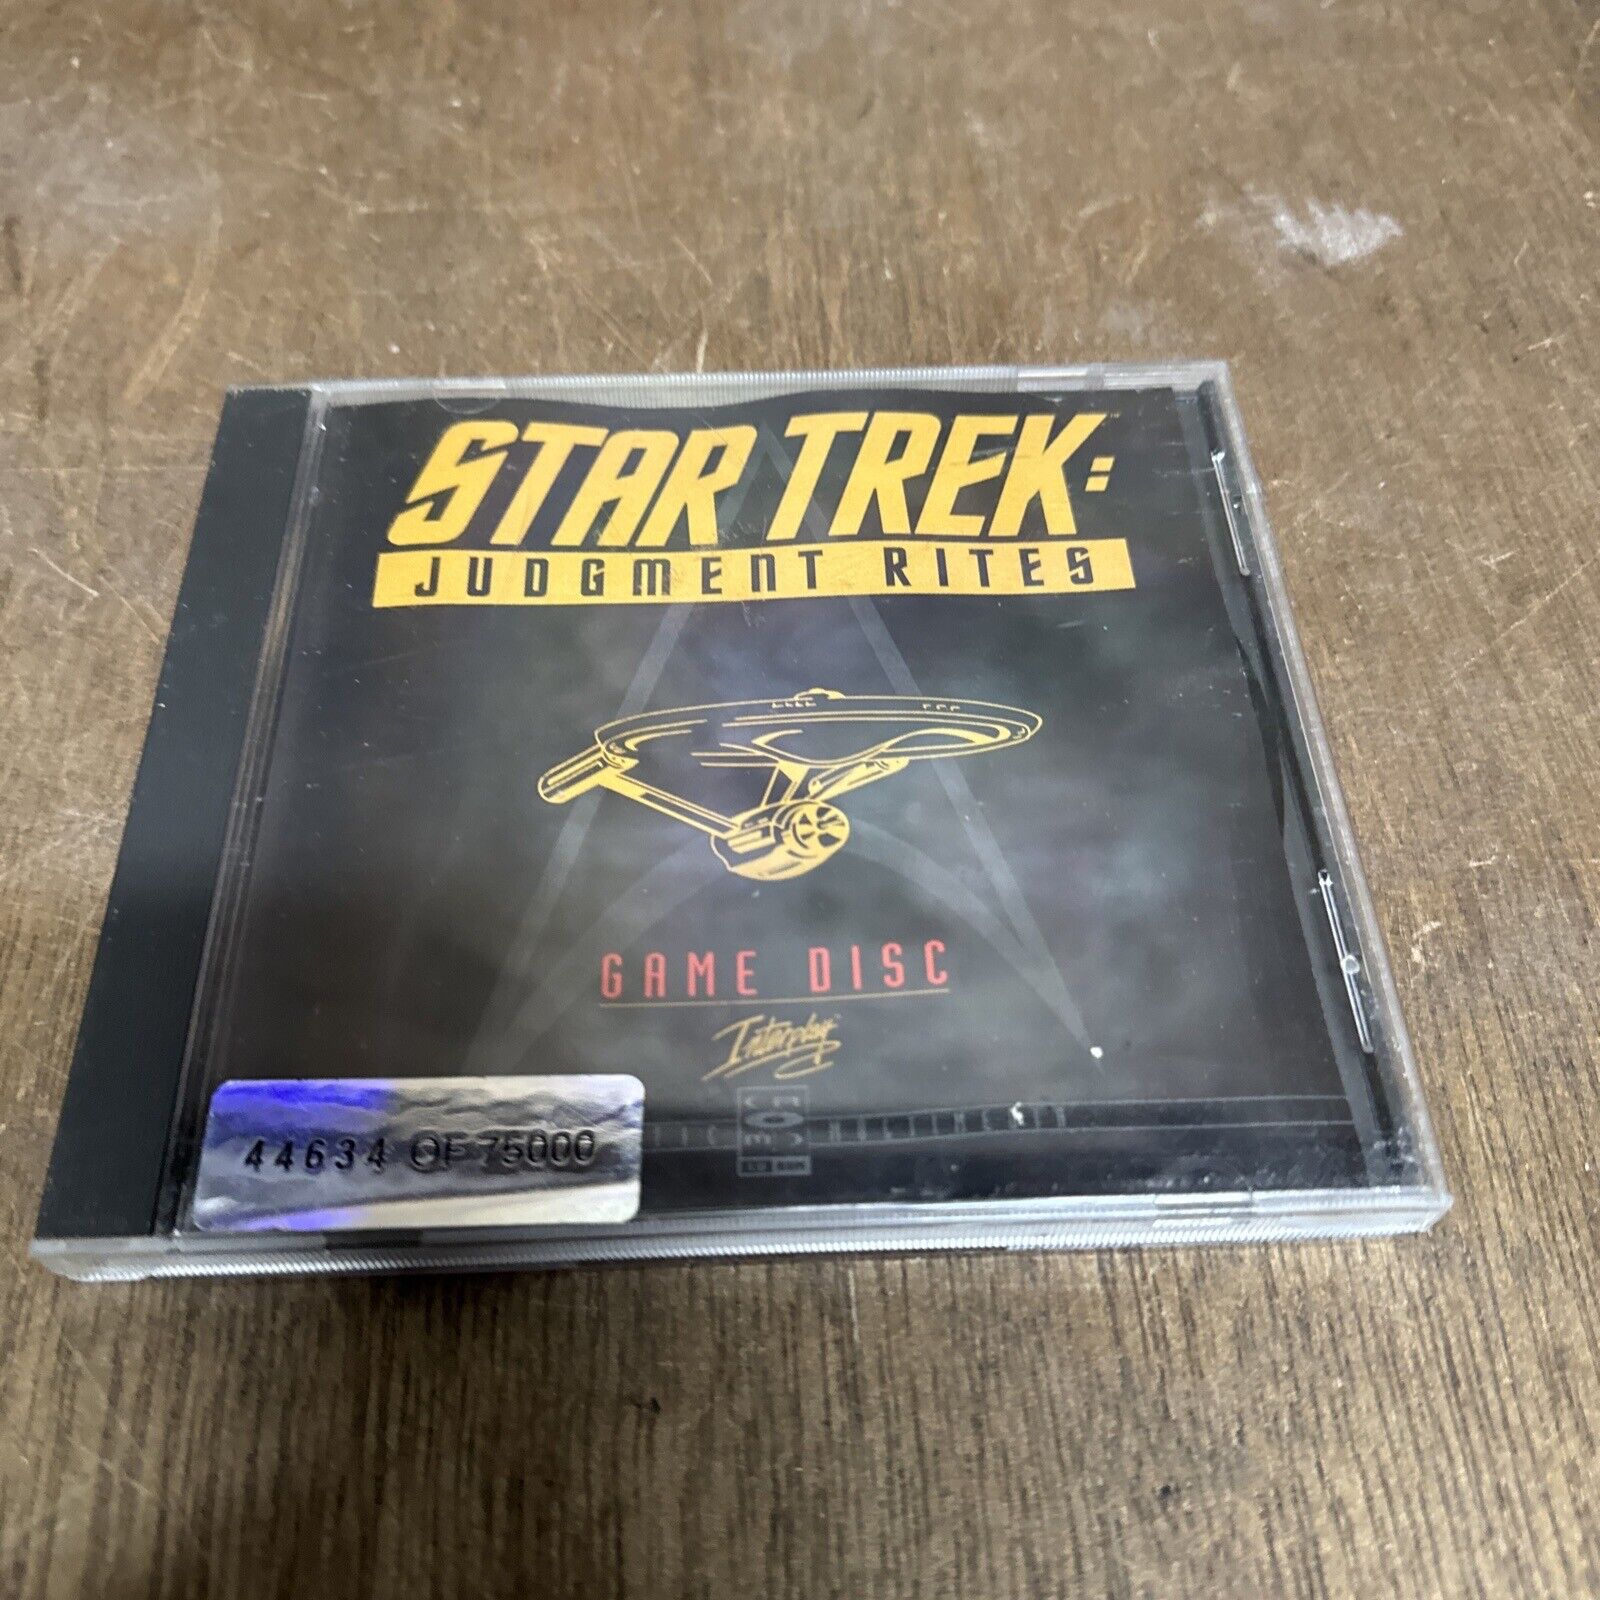 Star Trek: Judgment Rites Limited CD-ROM Collector's Edition (PC, 1995)